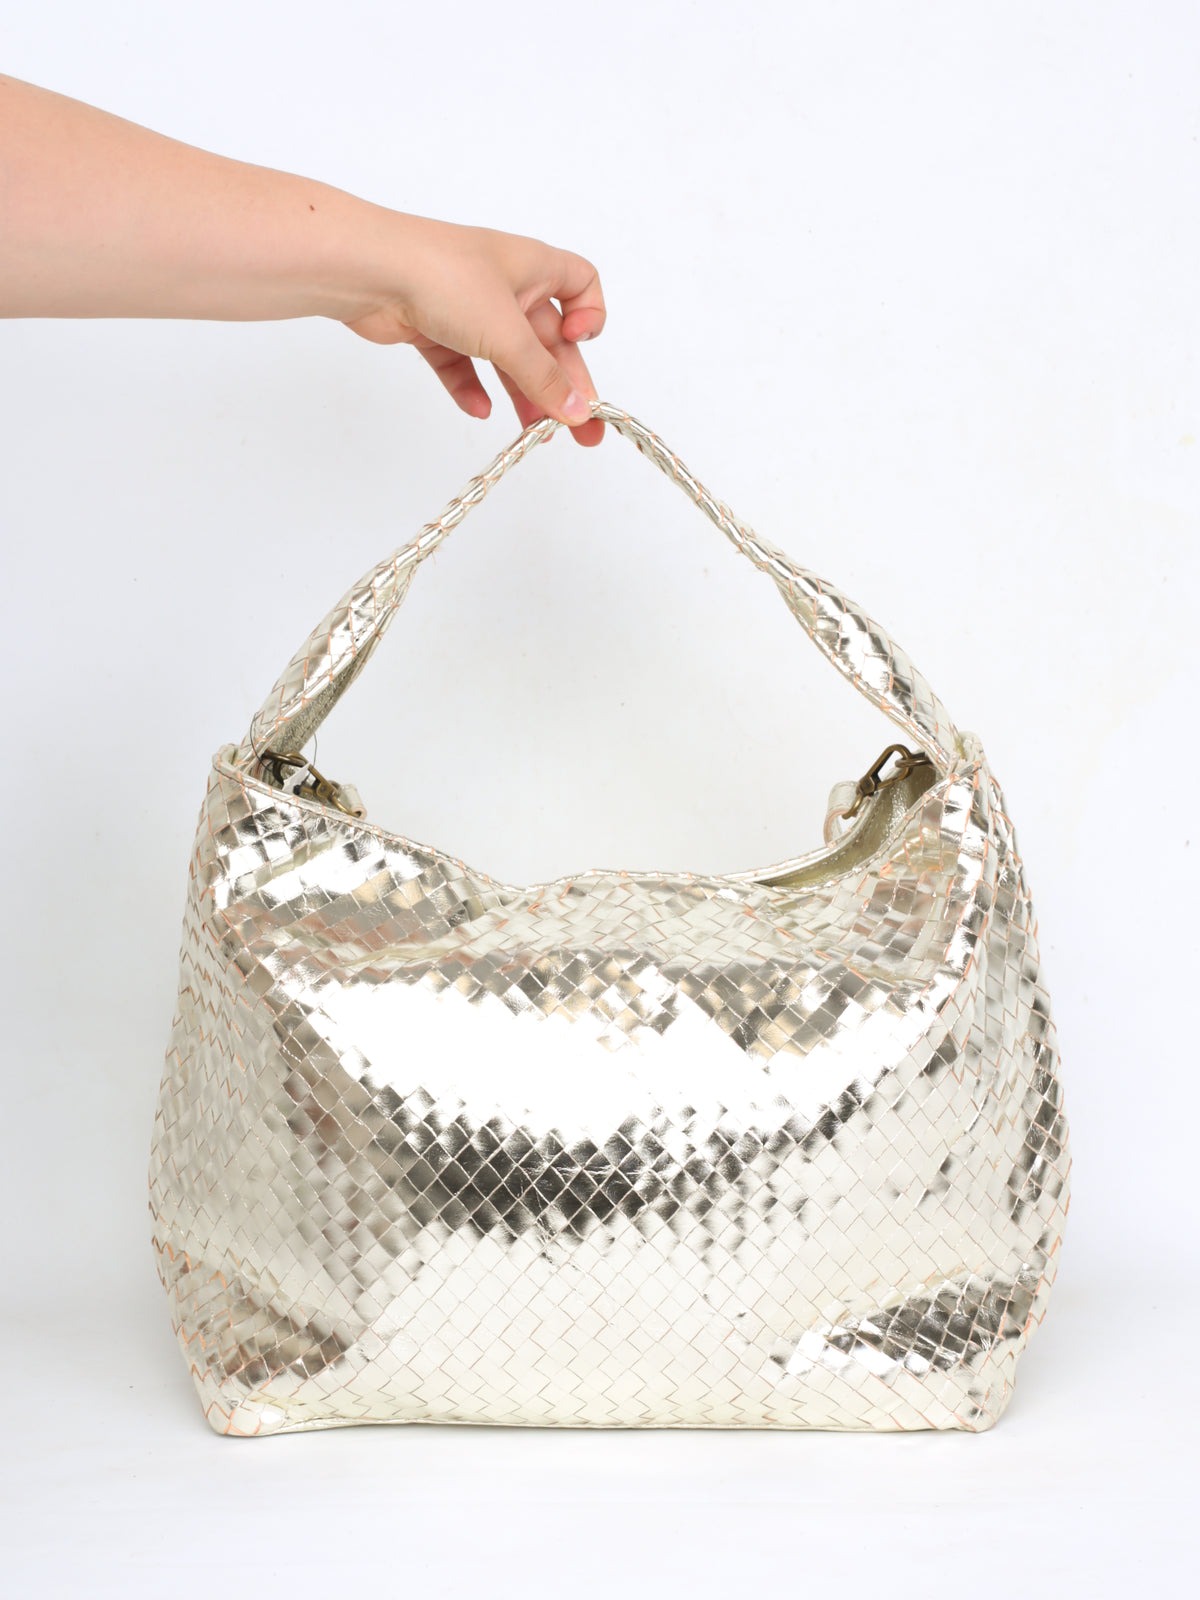 Braided leather bag gold